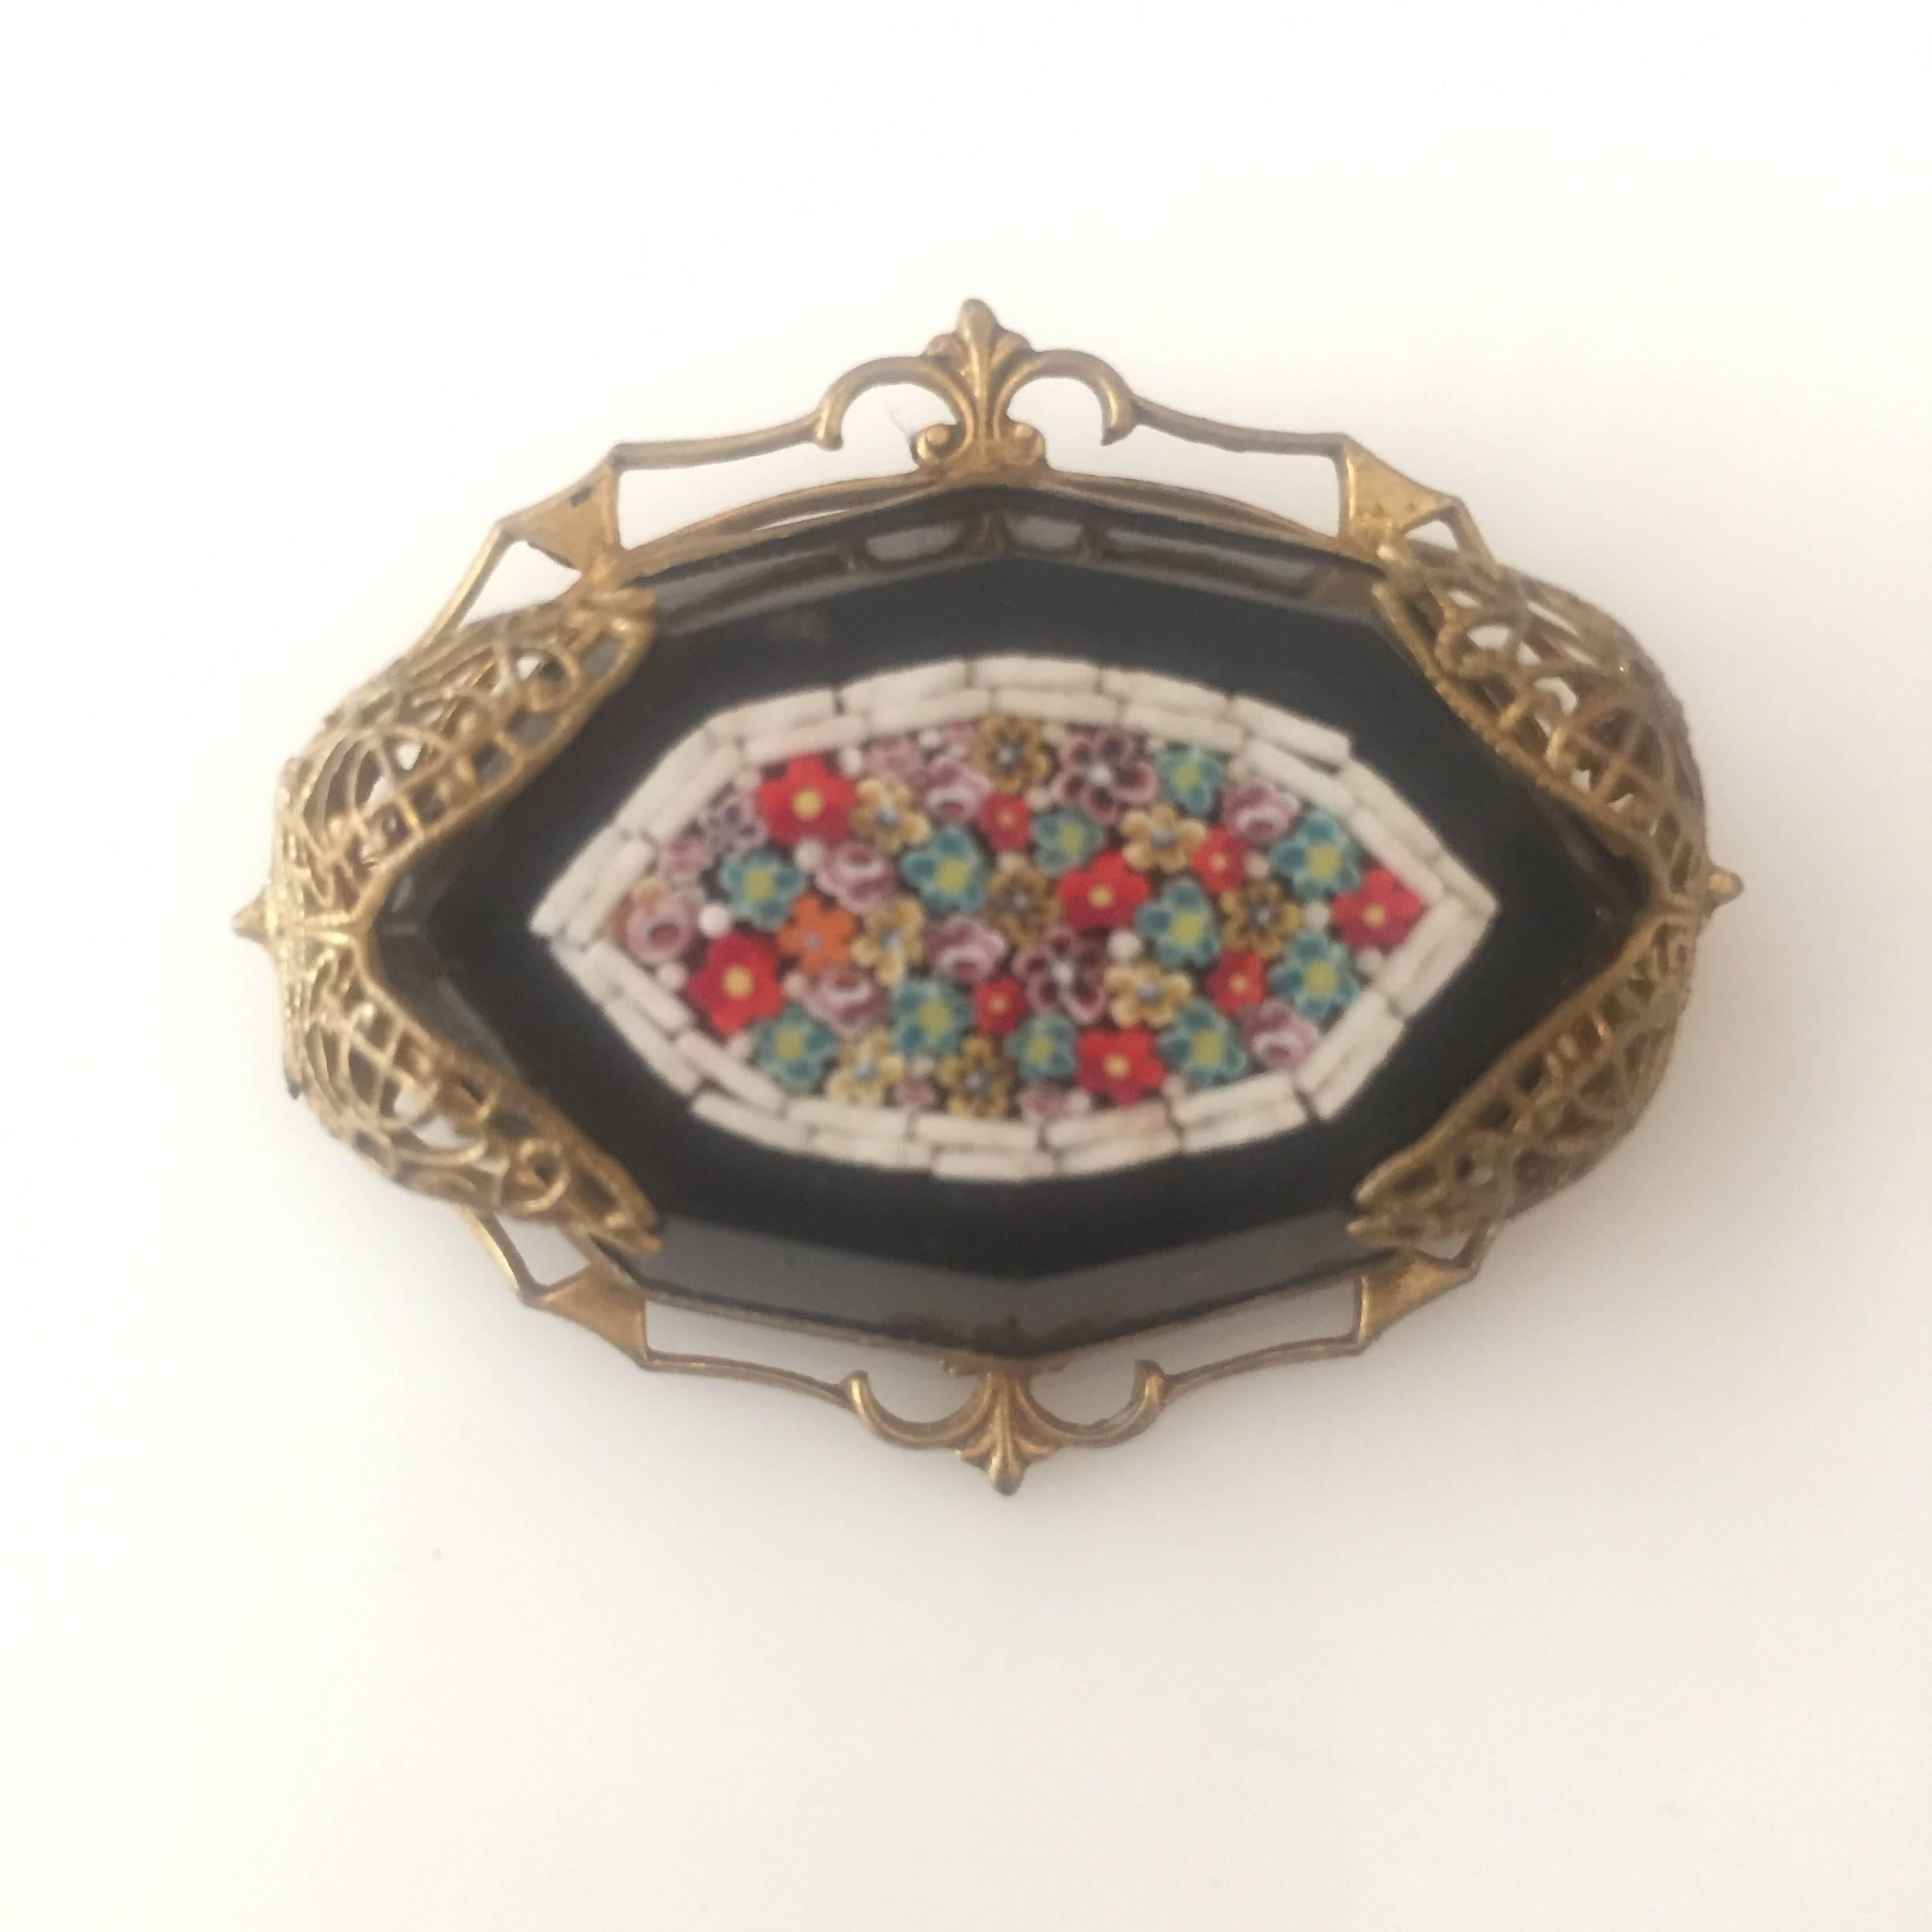 Late Victorian Murano glass mosaic on a black jet stone set in a golden filigree backing.

Measures: 1 3/4